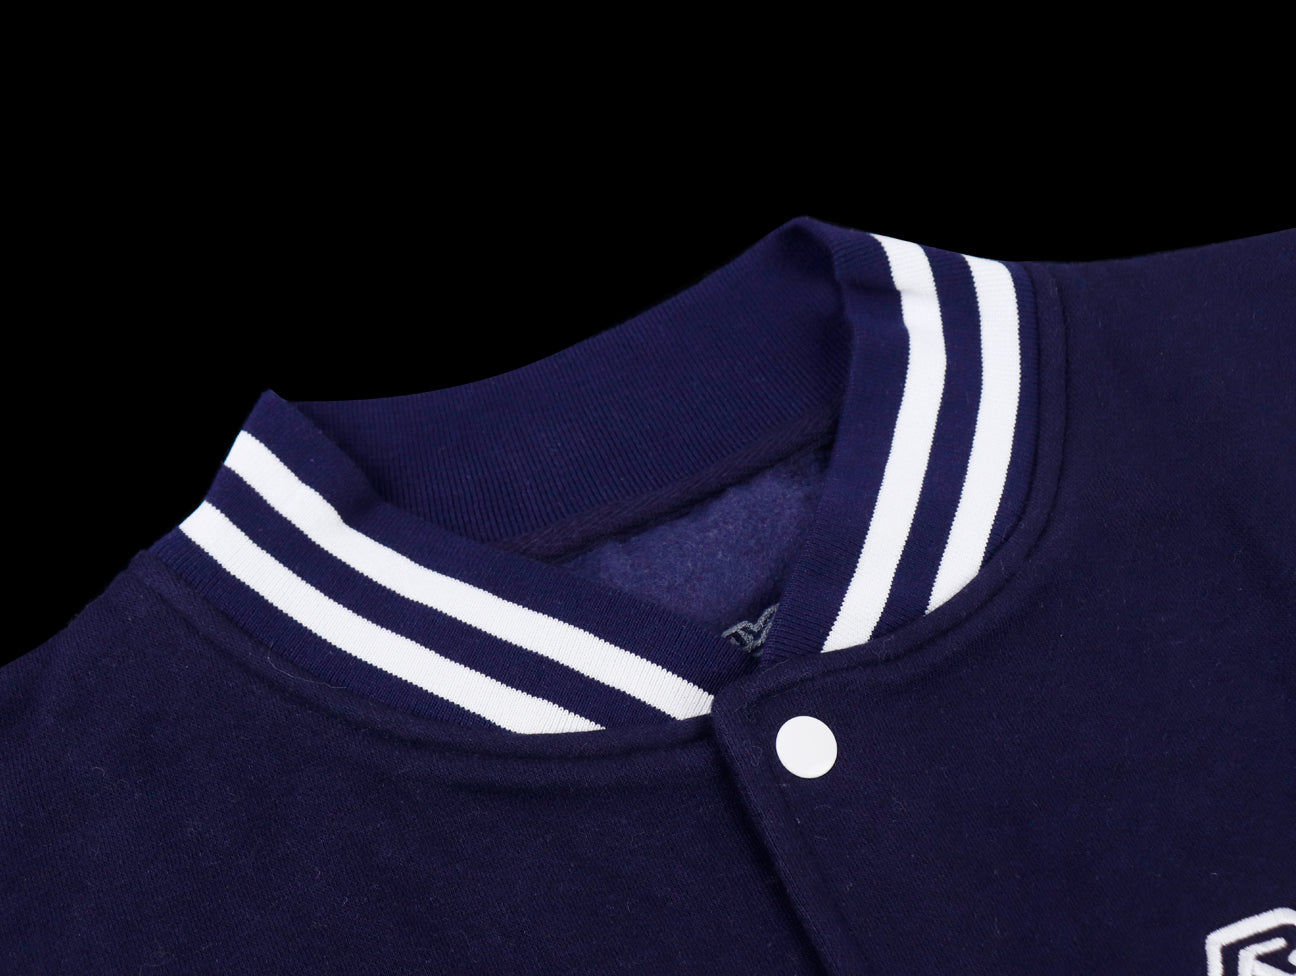 Rays The Concept is Racing Varsity Jacket - Oxford Navy / White